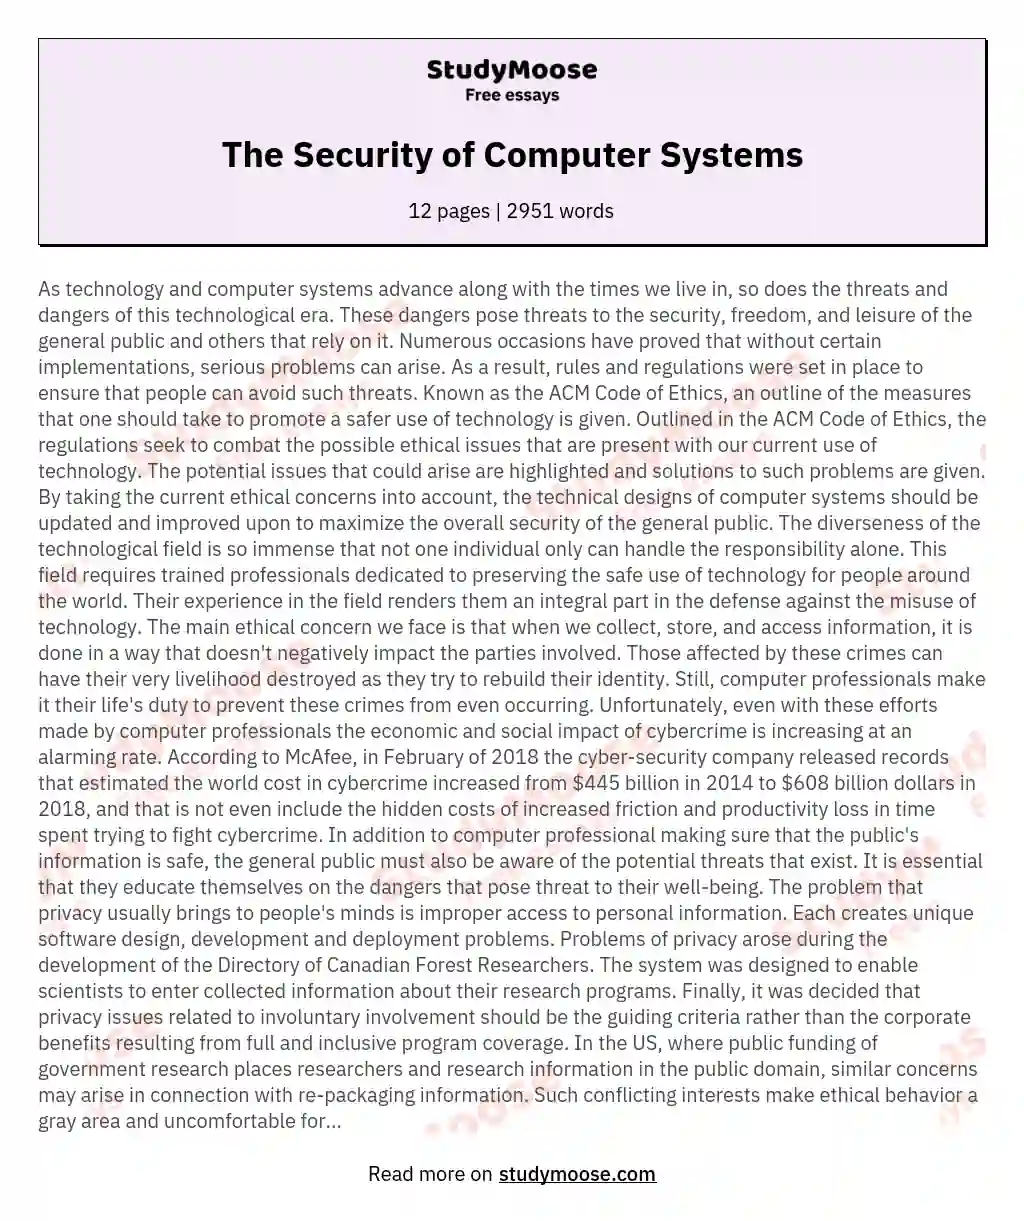 The Security of Computer Systems essay